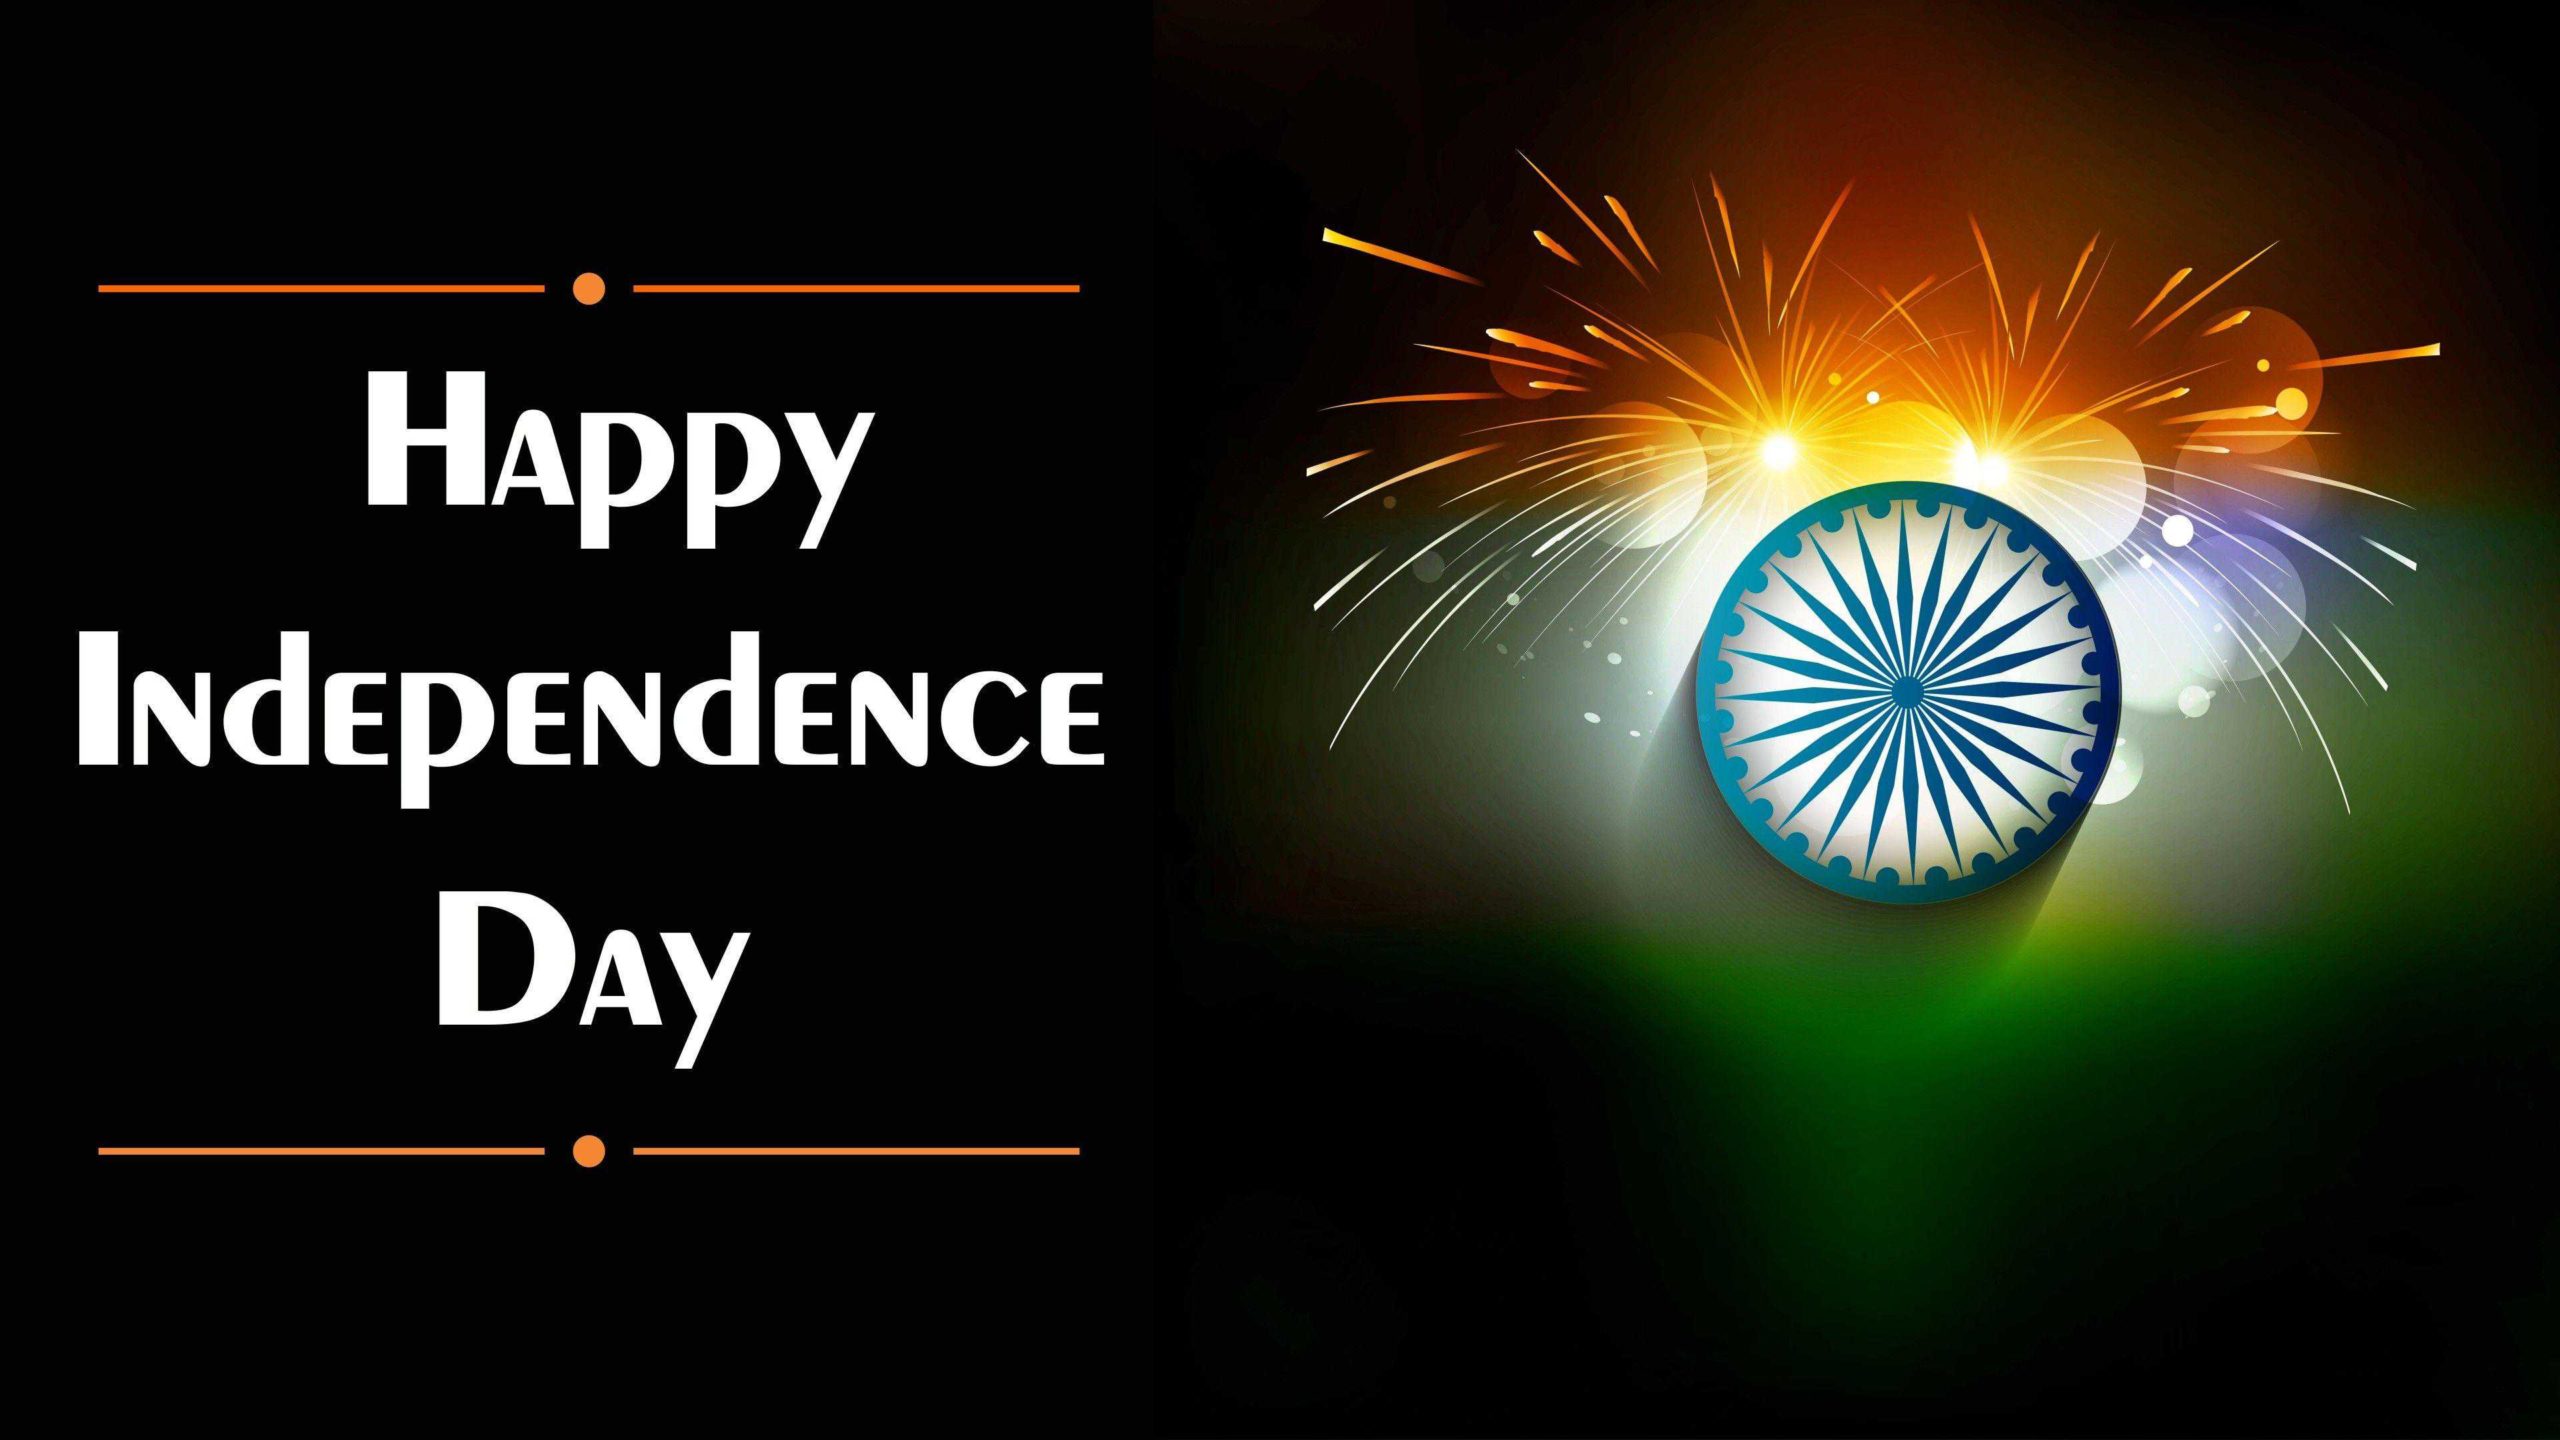 60+] Happy Independence Day Images, Pic, Photo & Wallpaper